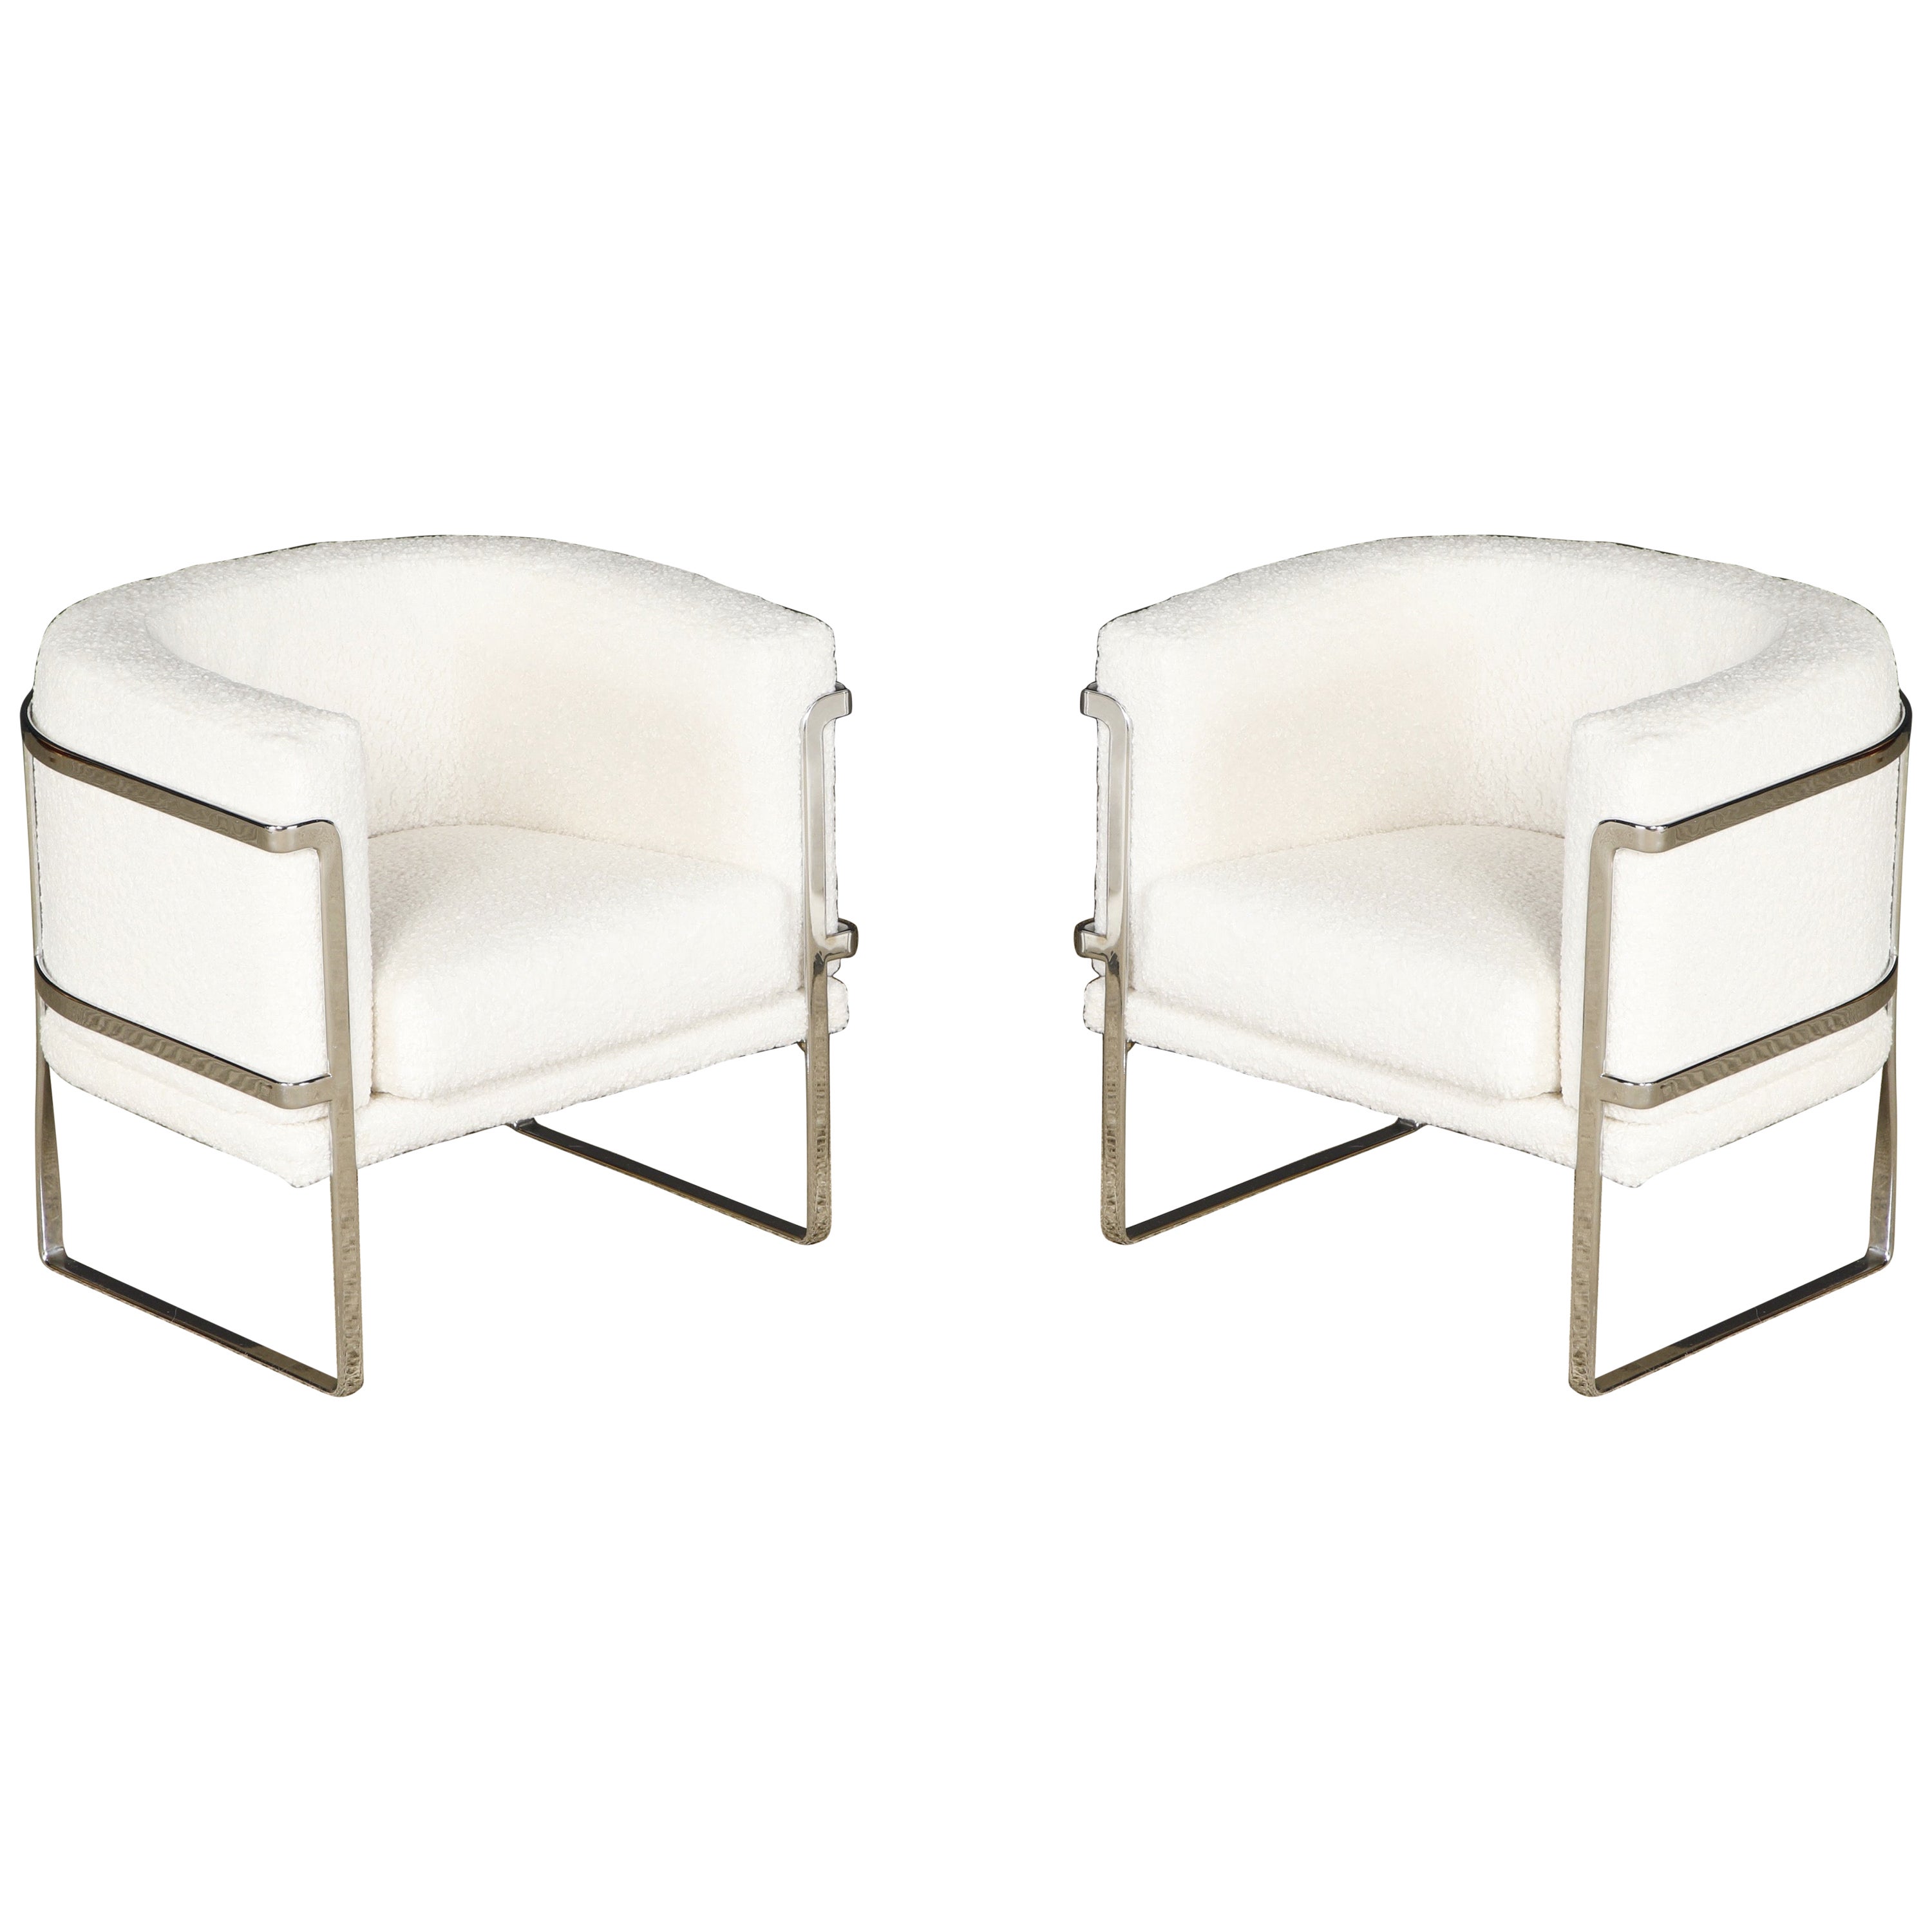 Pair of Club Chairs by Claudio Salocchi for Sormani Italy, c 1970, Signed